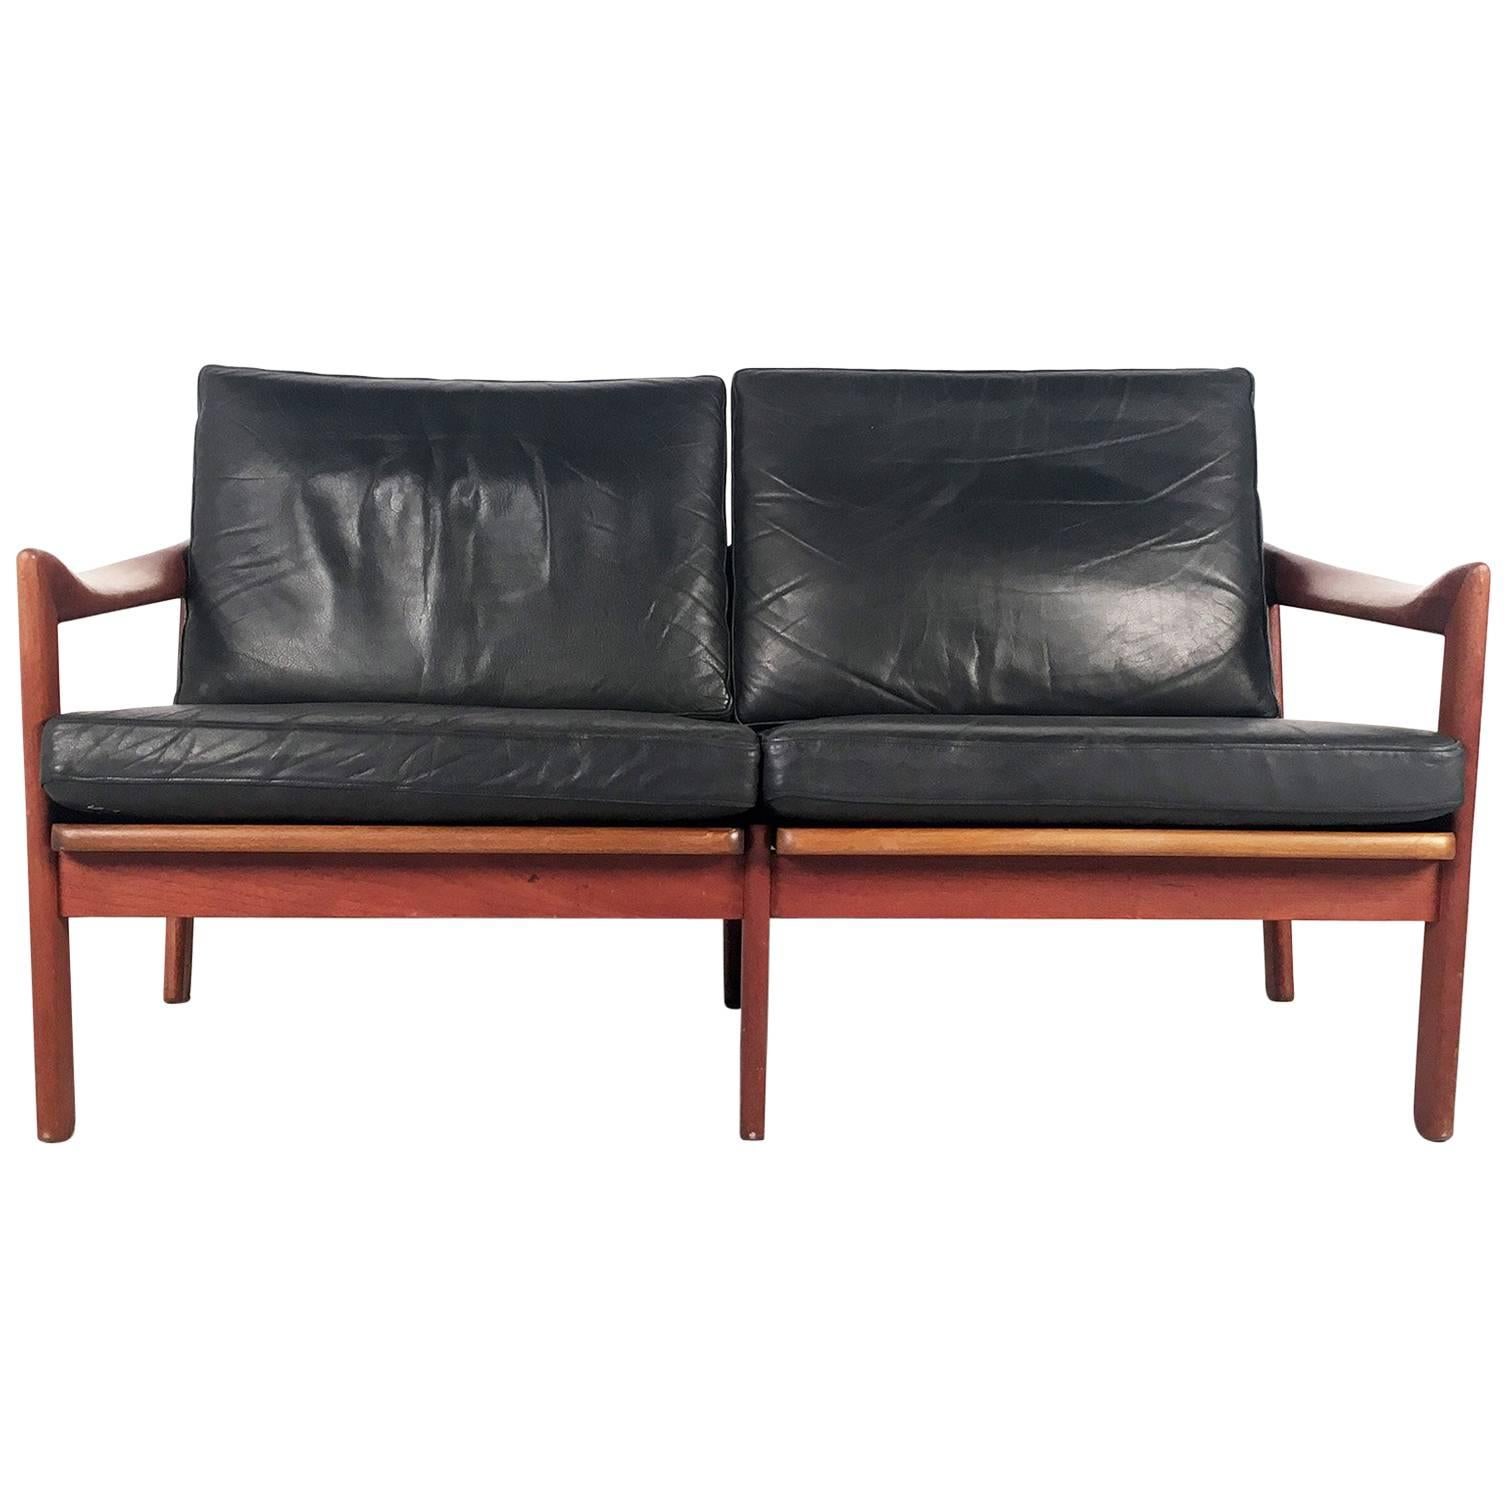 Danish Two-Seat Sofa by Illum Wikkelso for Eilersen For Sale